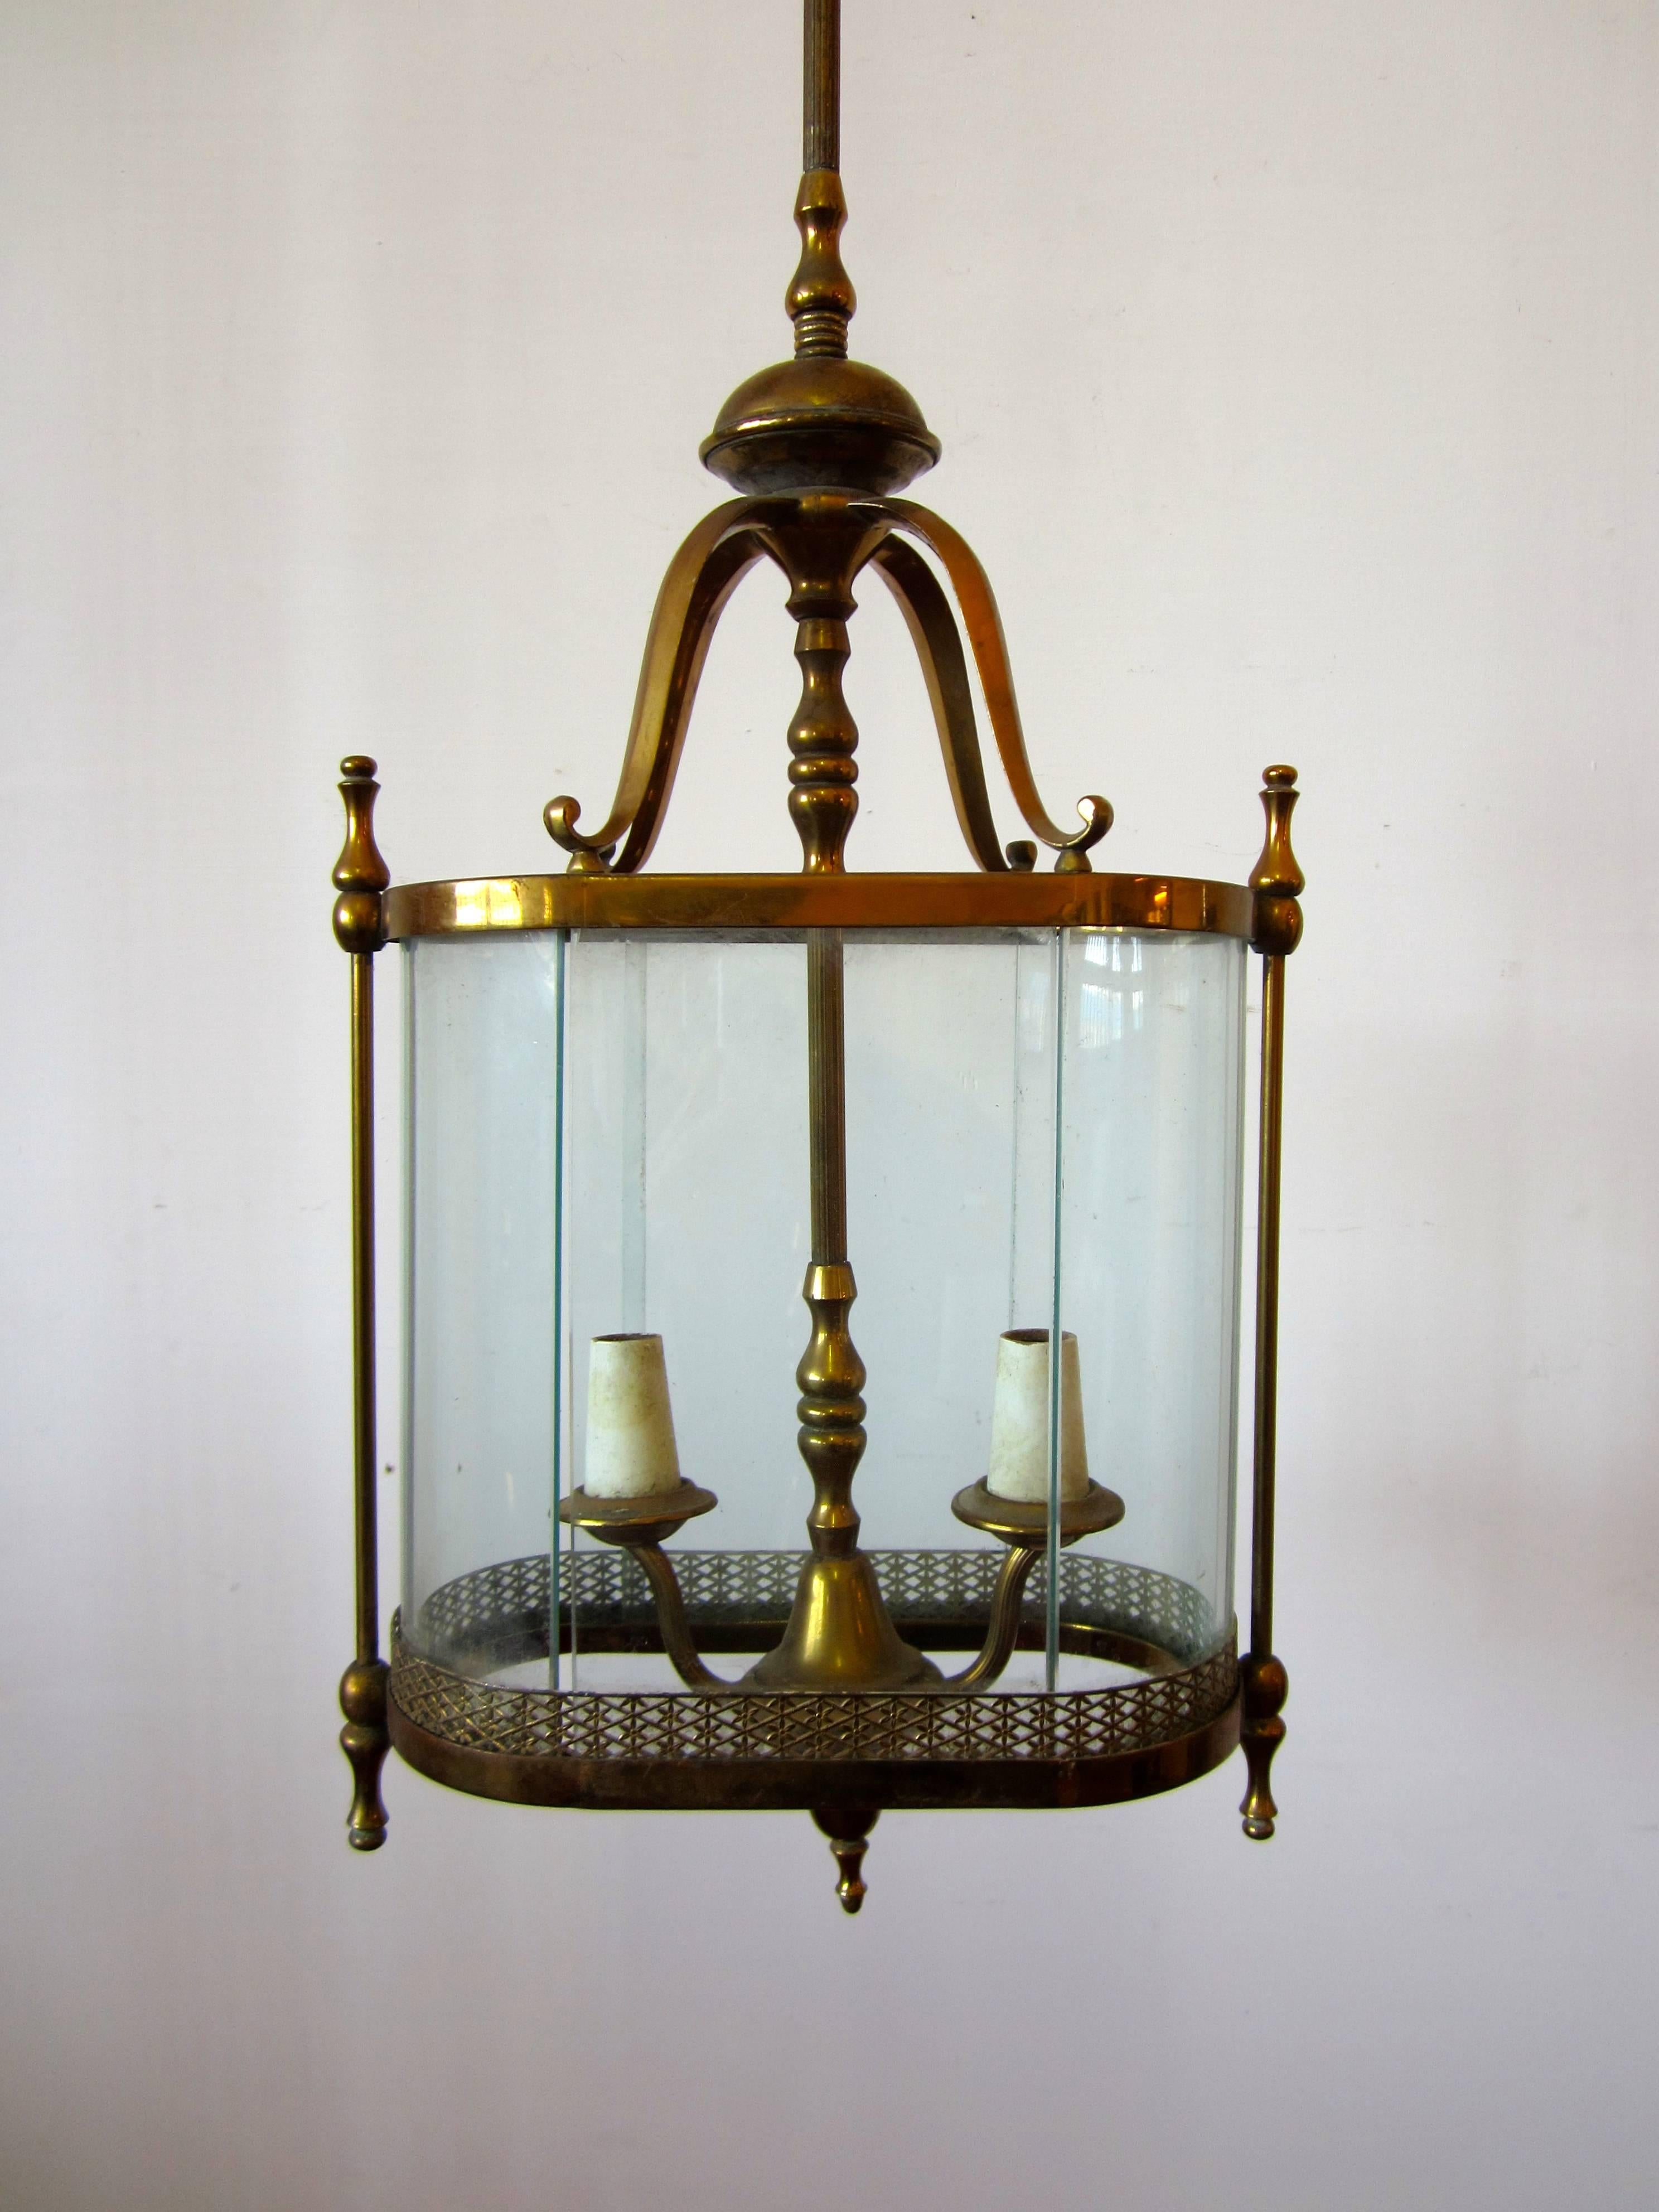 A mid-20th century brass lantern with glass.